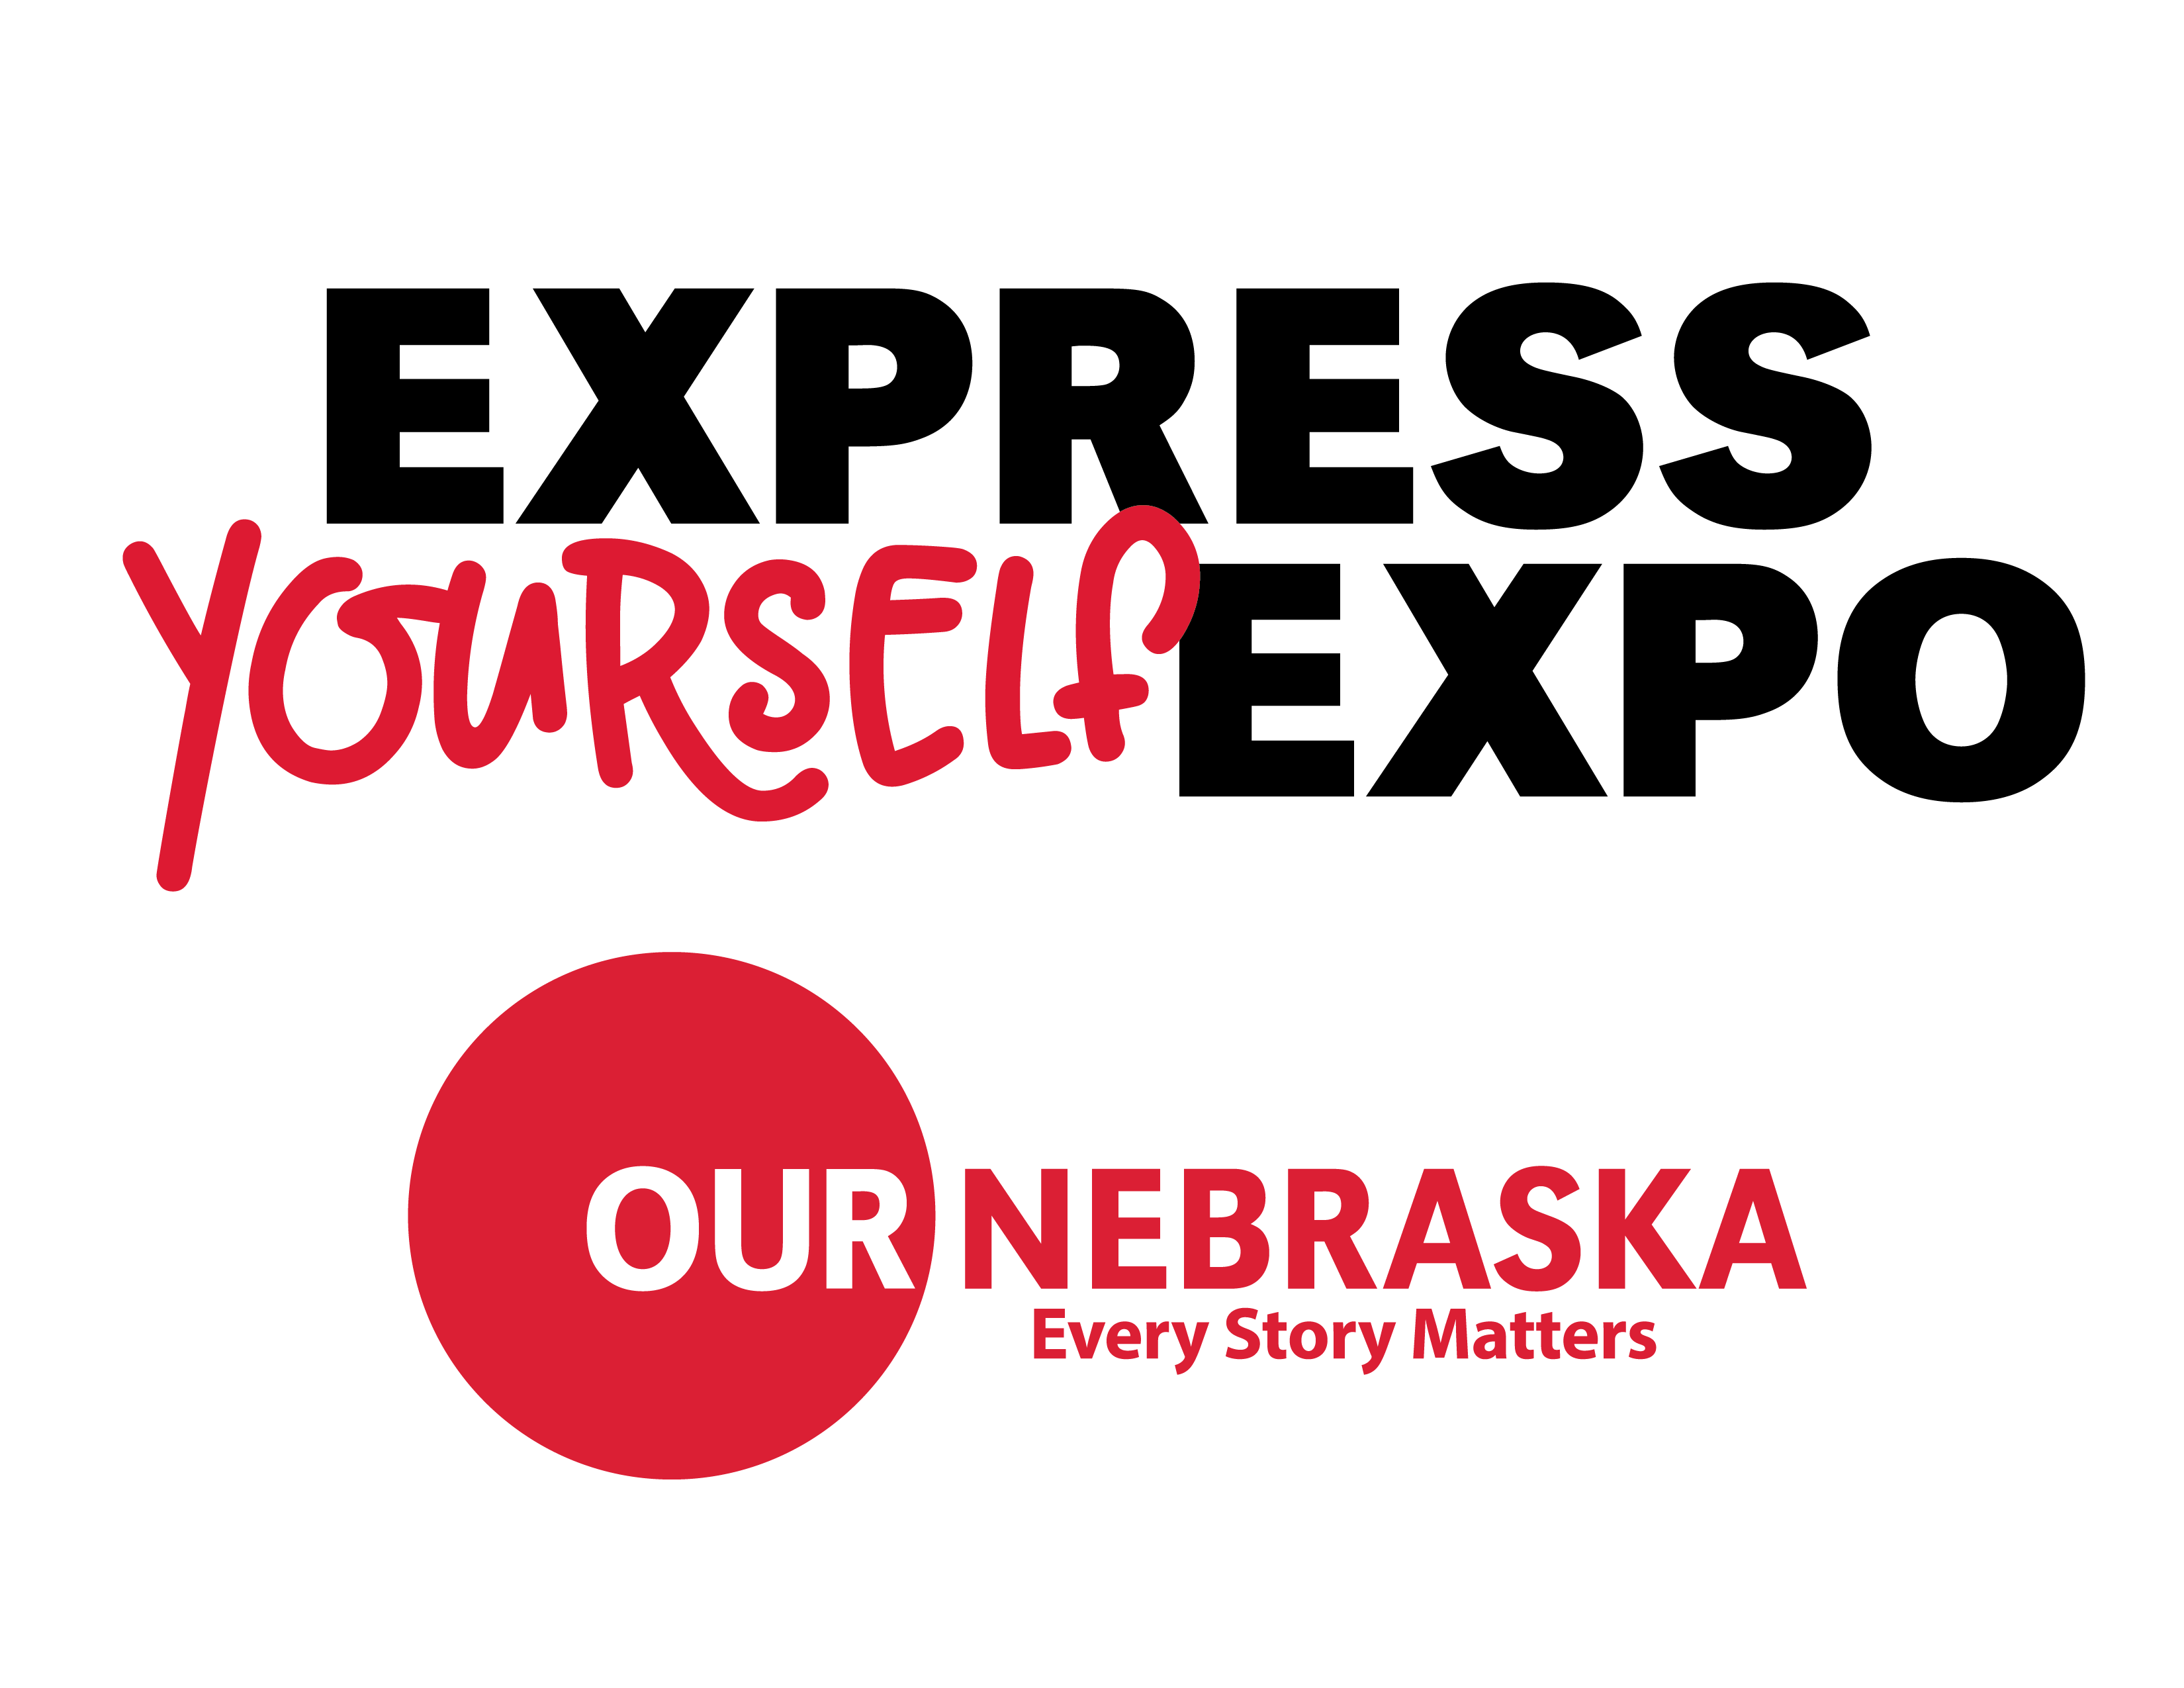 Express Yourself Expo